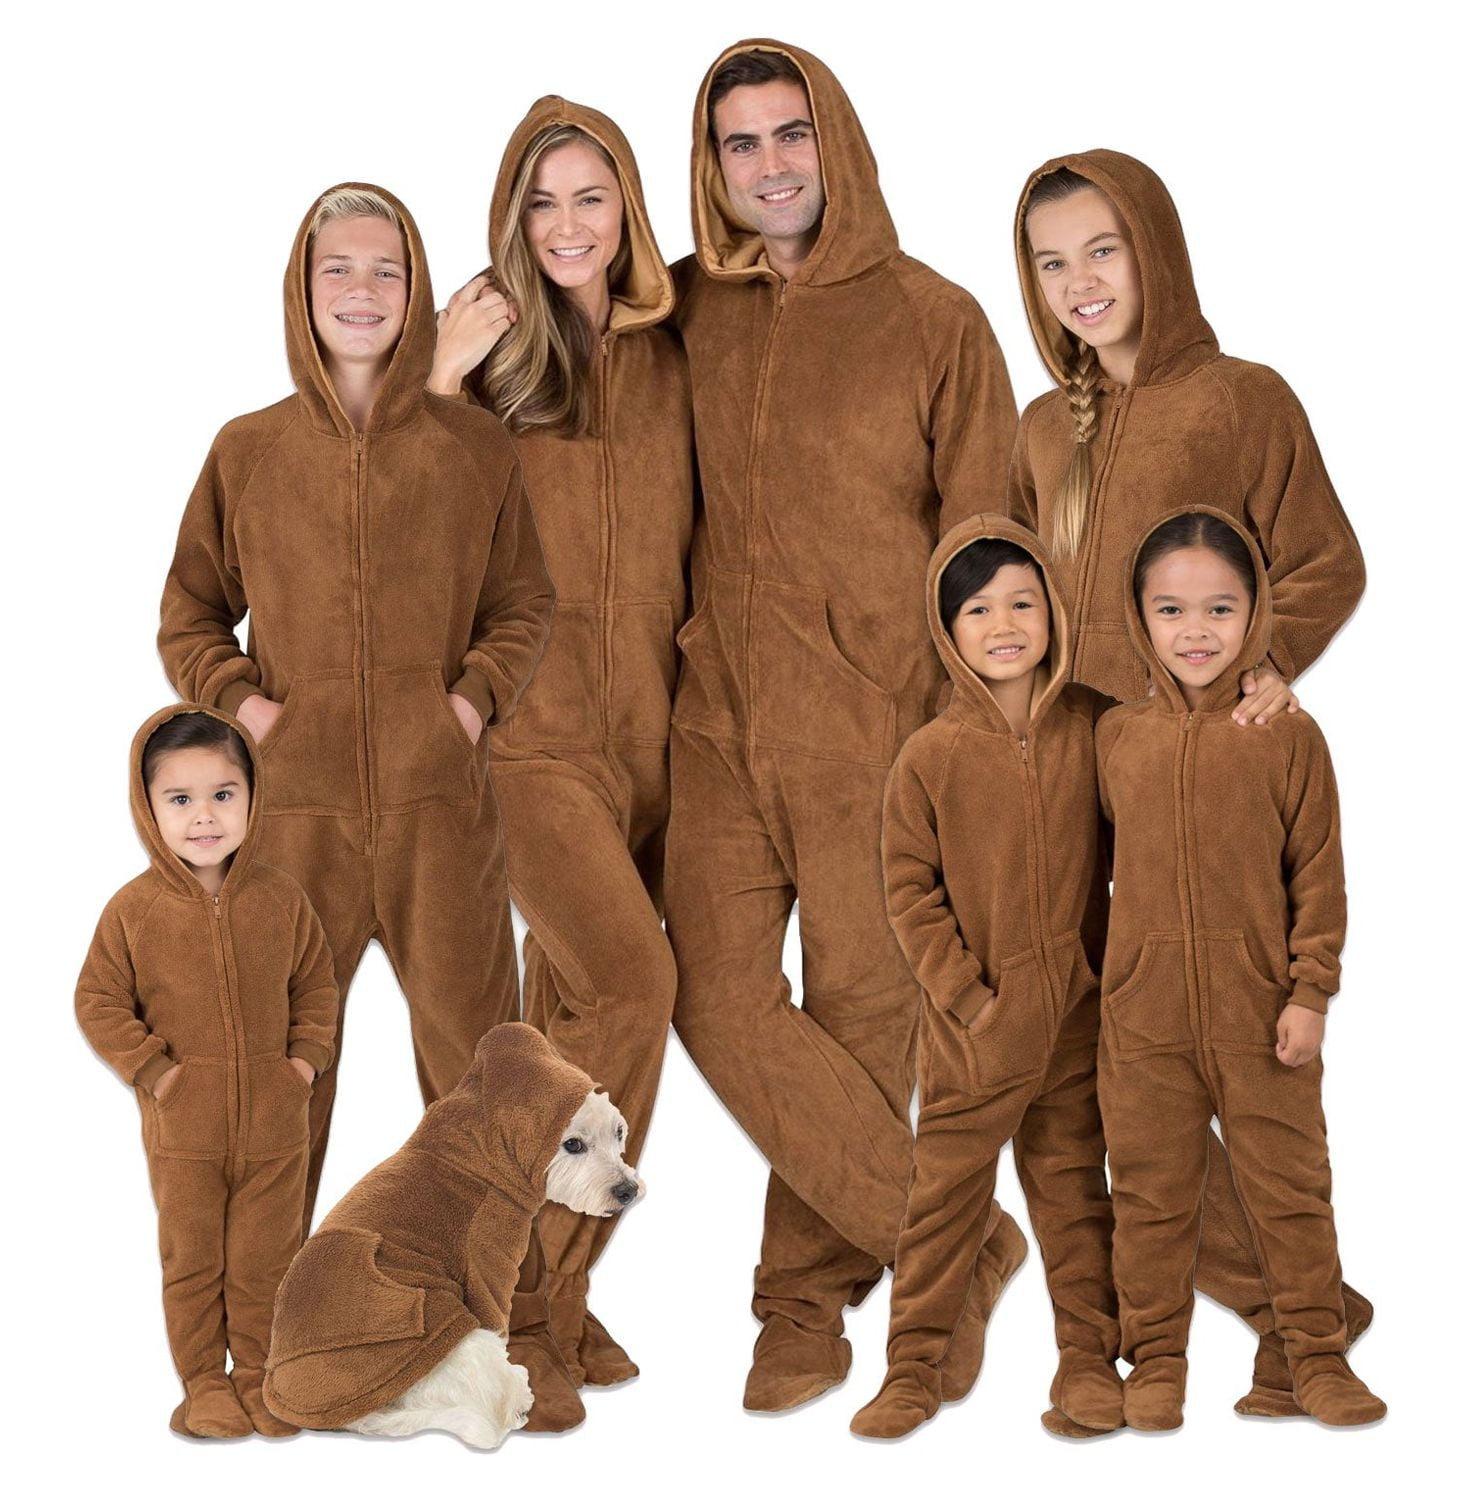 Footed Pajamas - Family Matching Chocolate Brown Hoodie One Pieces for  Boys, Girls, Men, Women and Pets - Toddler - Large (Fits 3'4 - 3'6)